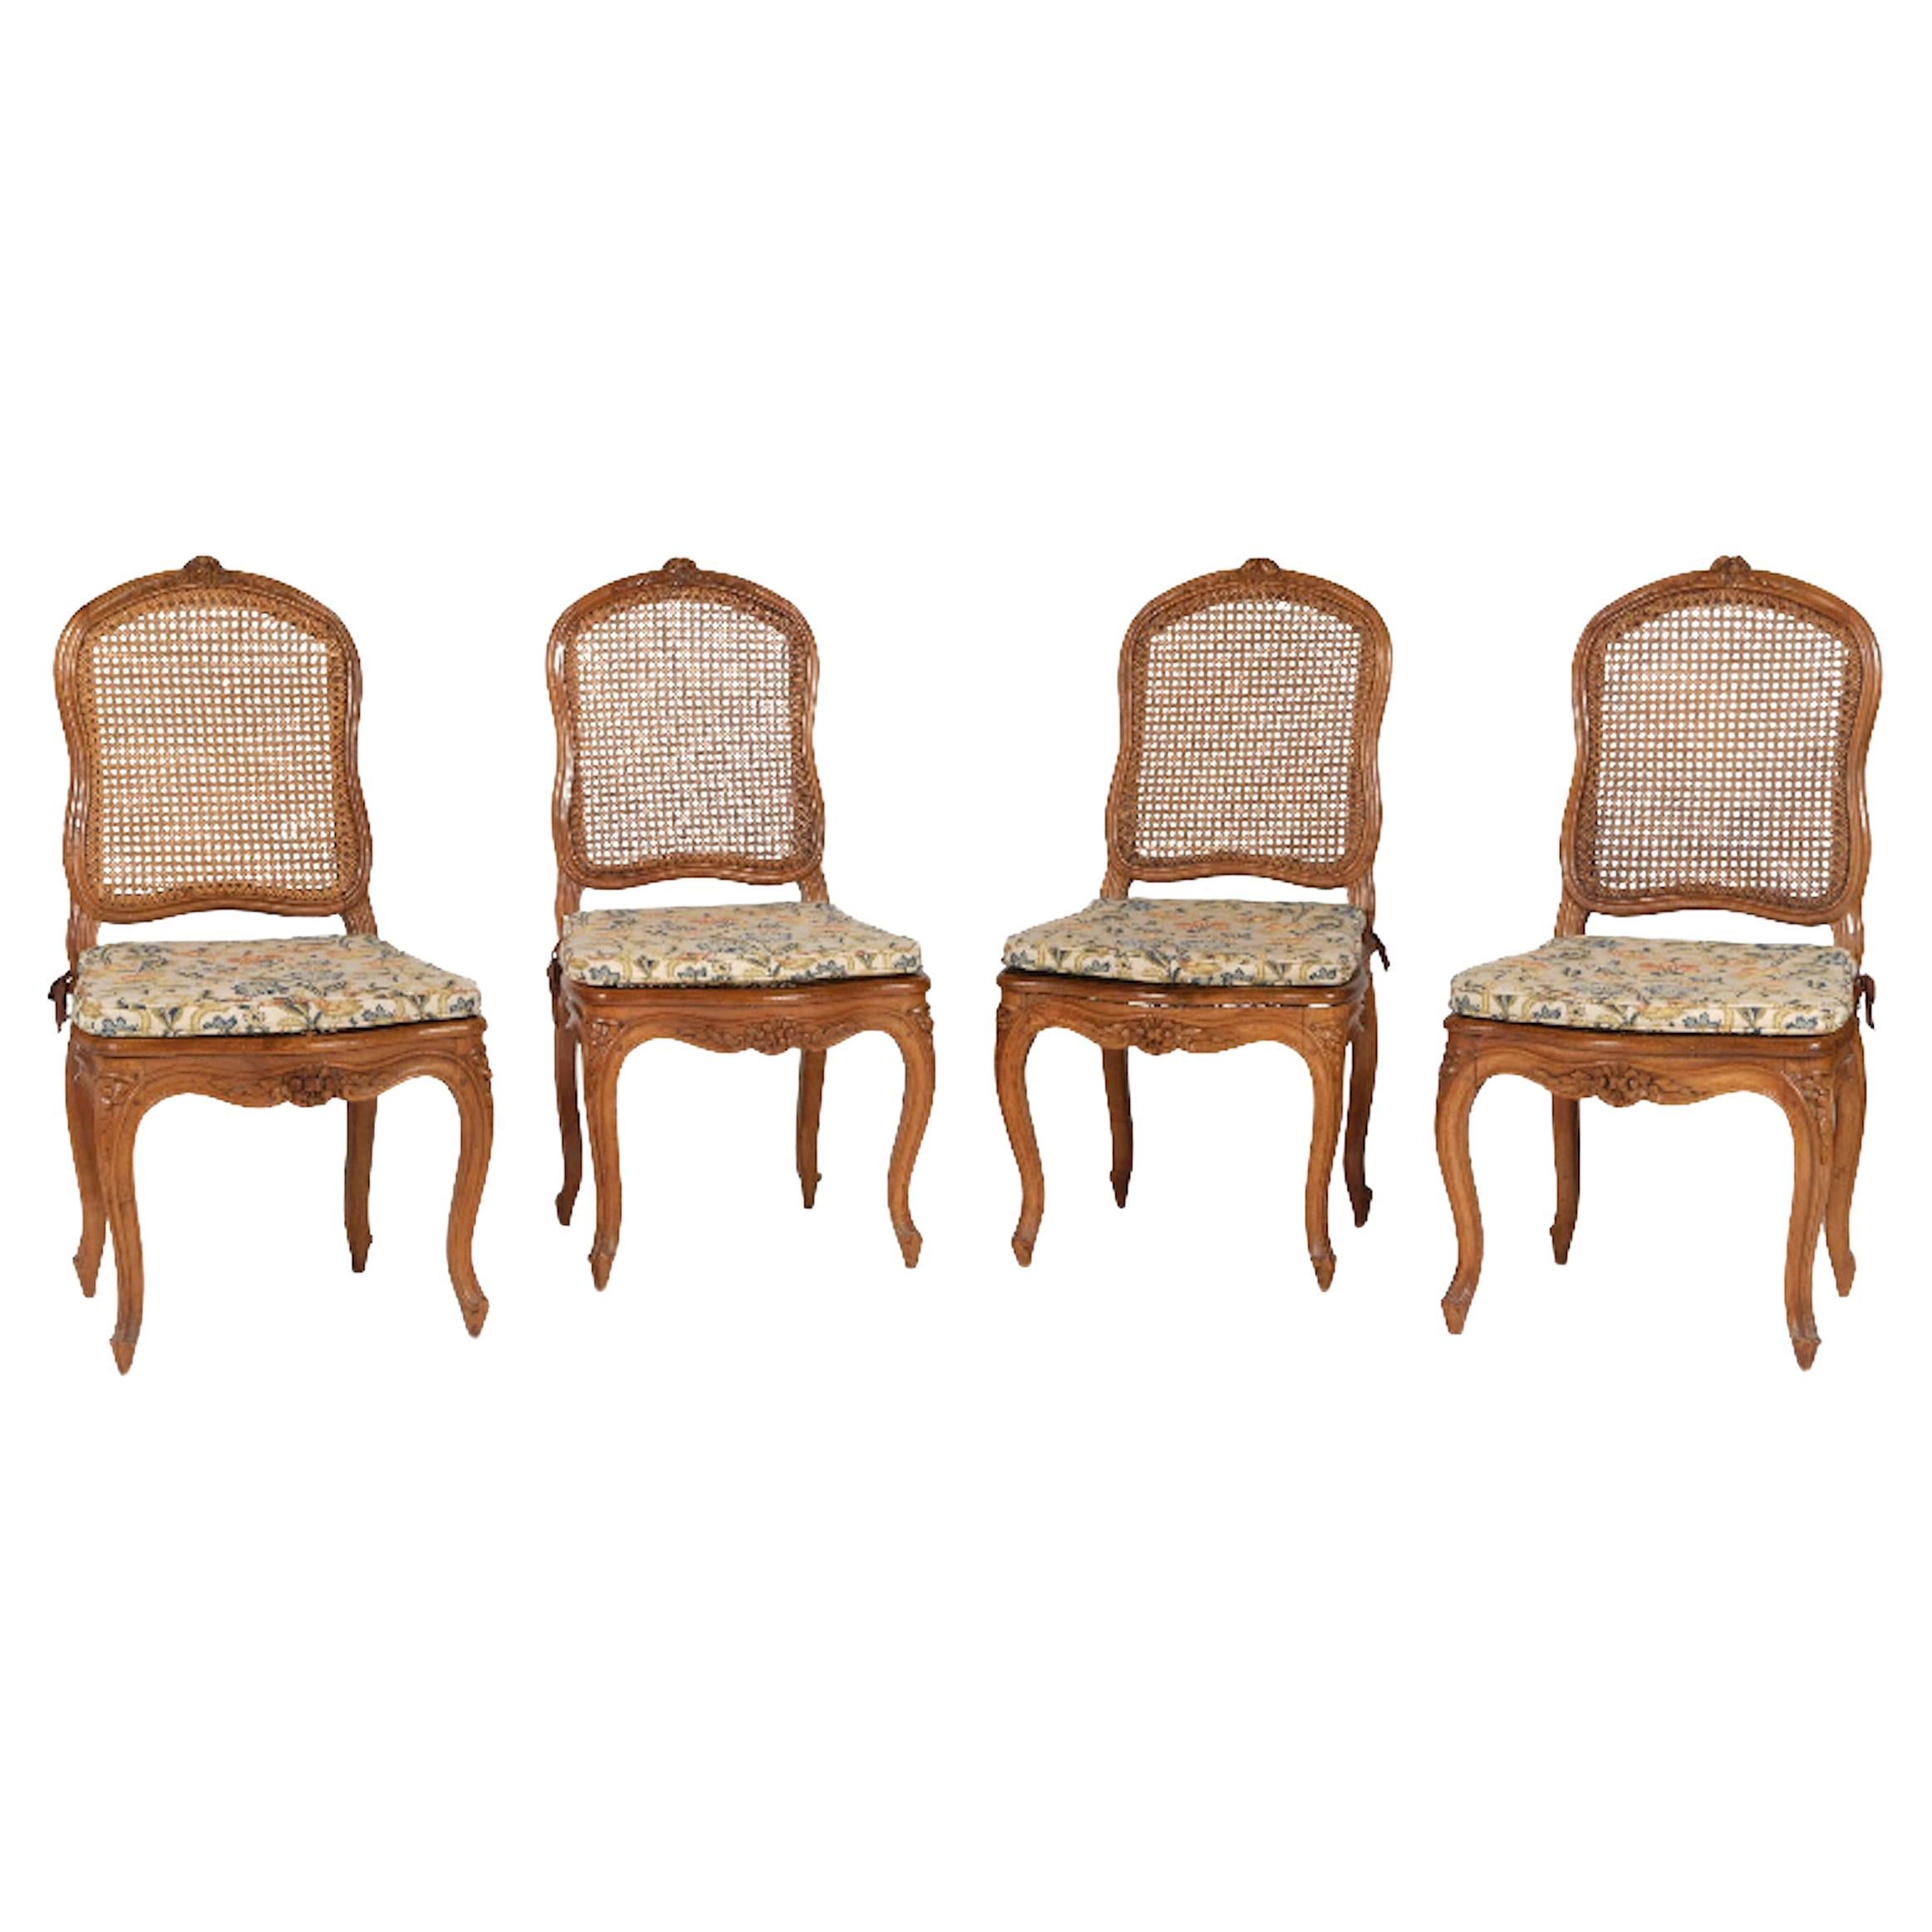 19th Century French Cane Chairs in Hand Carved Walnut Frame in Louis XV Style